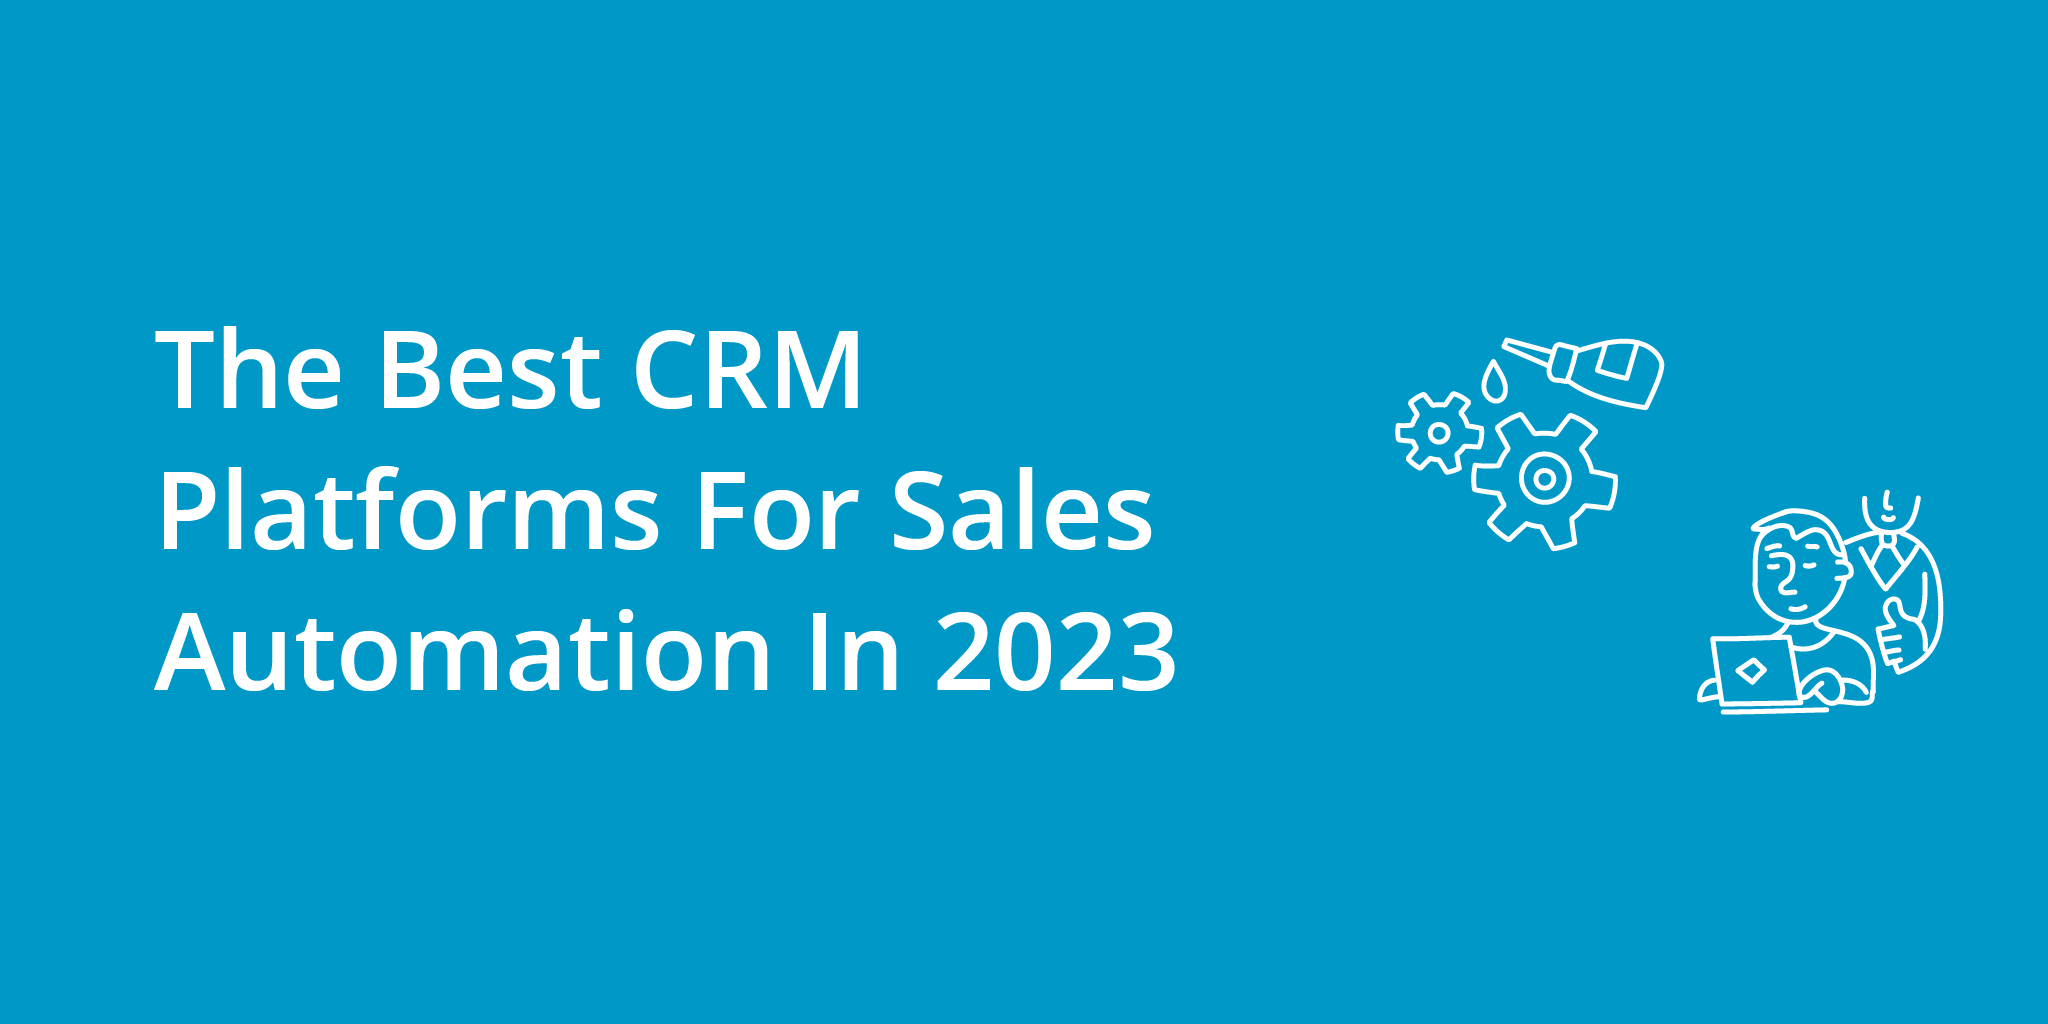 The Best CRM Platforms For Sales Automation In 2023